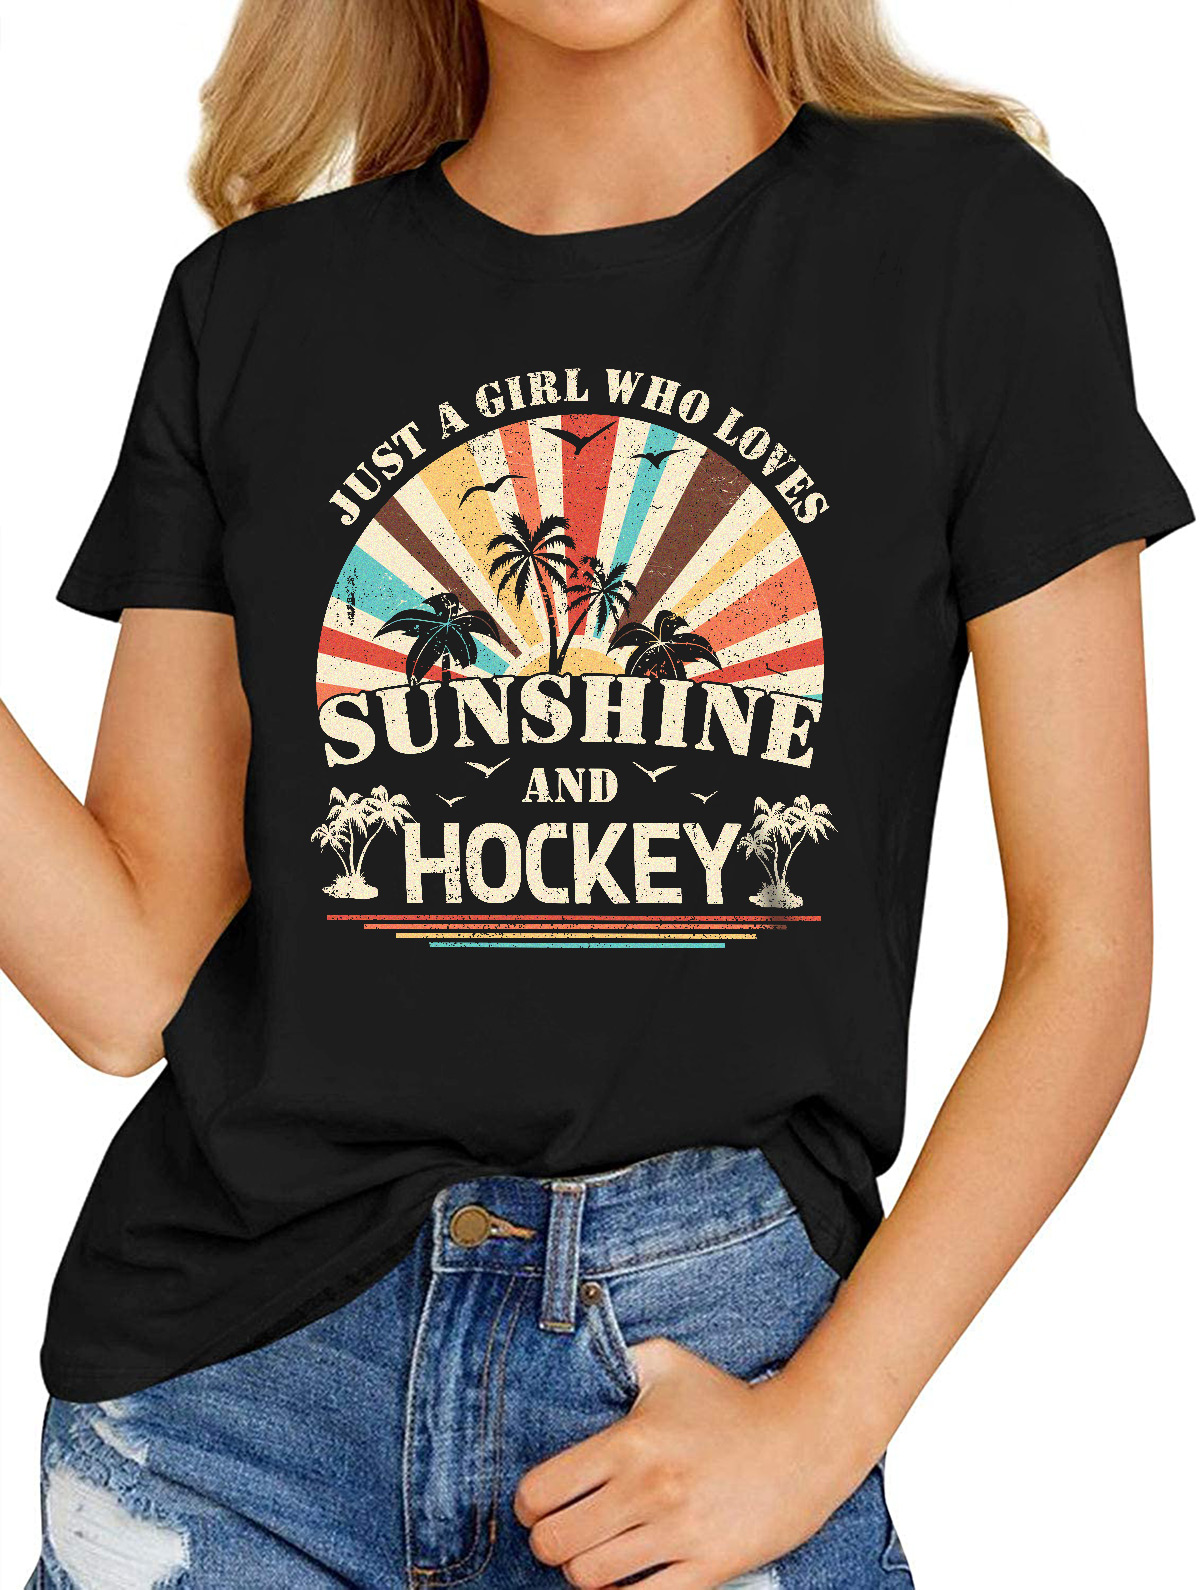 Just a Girl Who Loves Hockey T-shirt